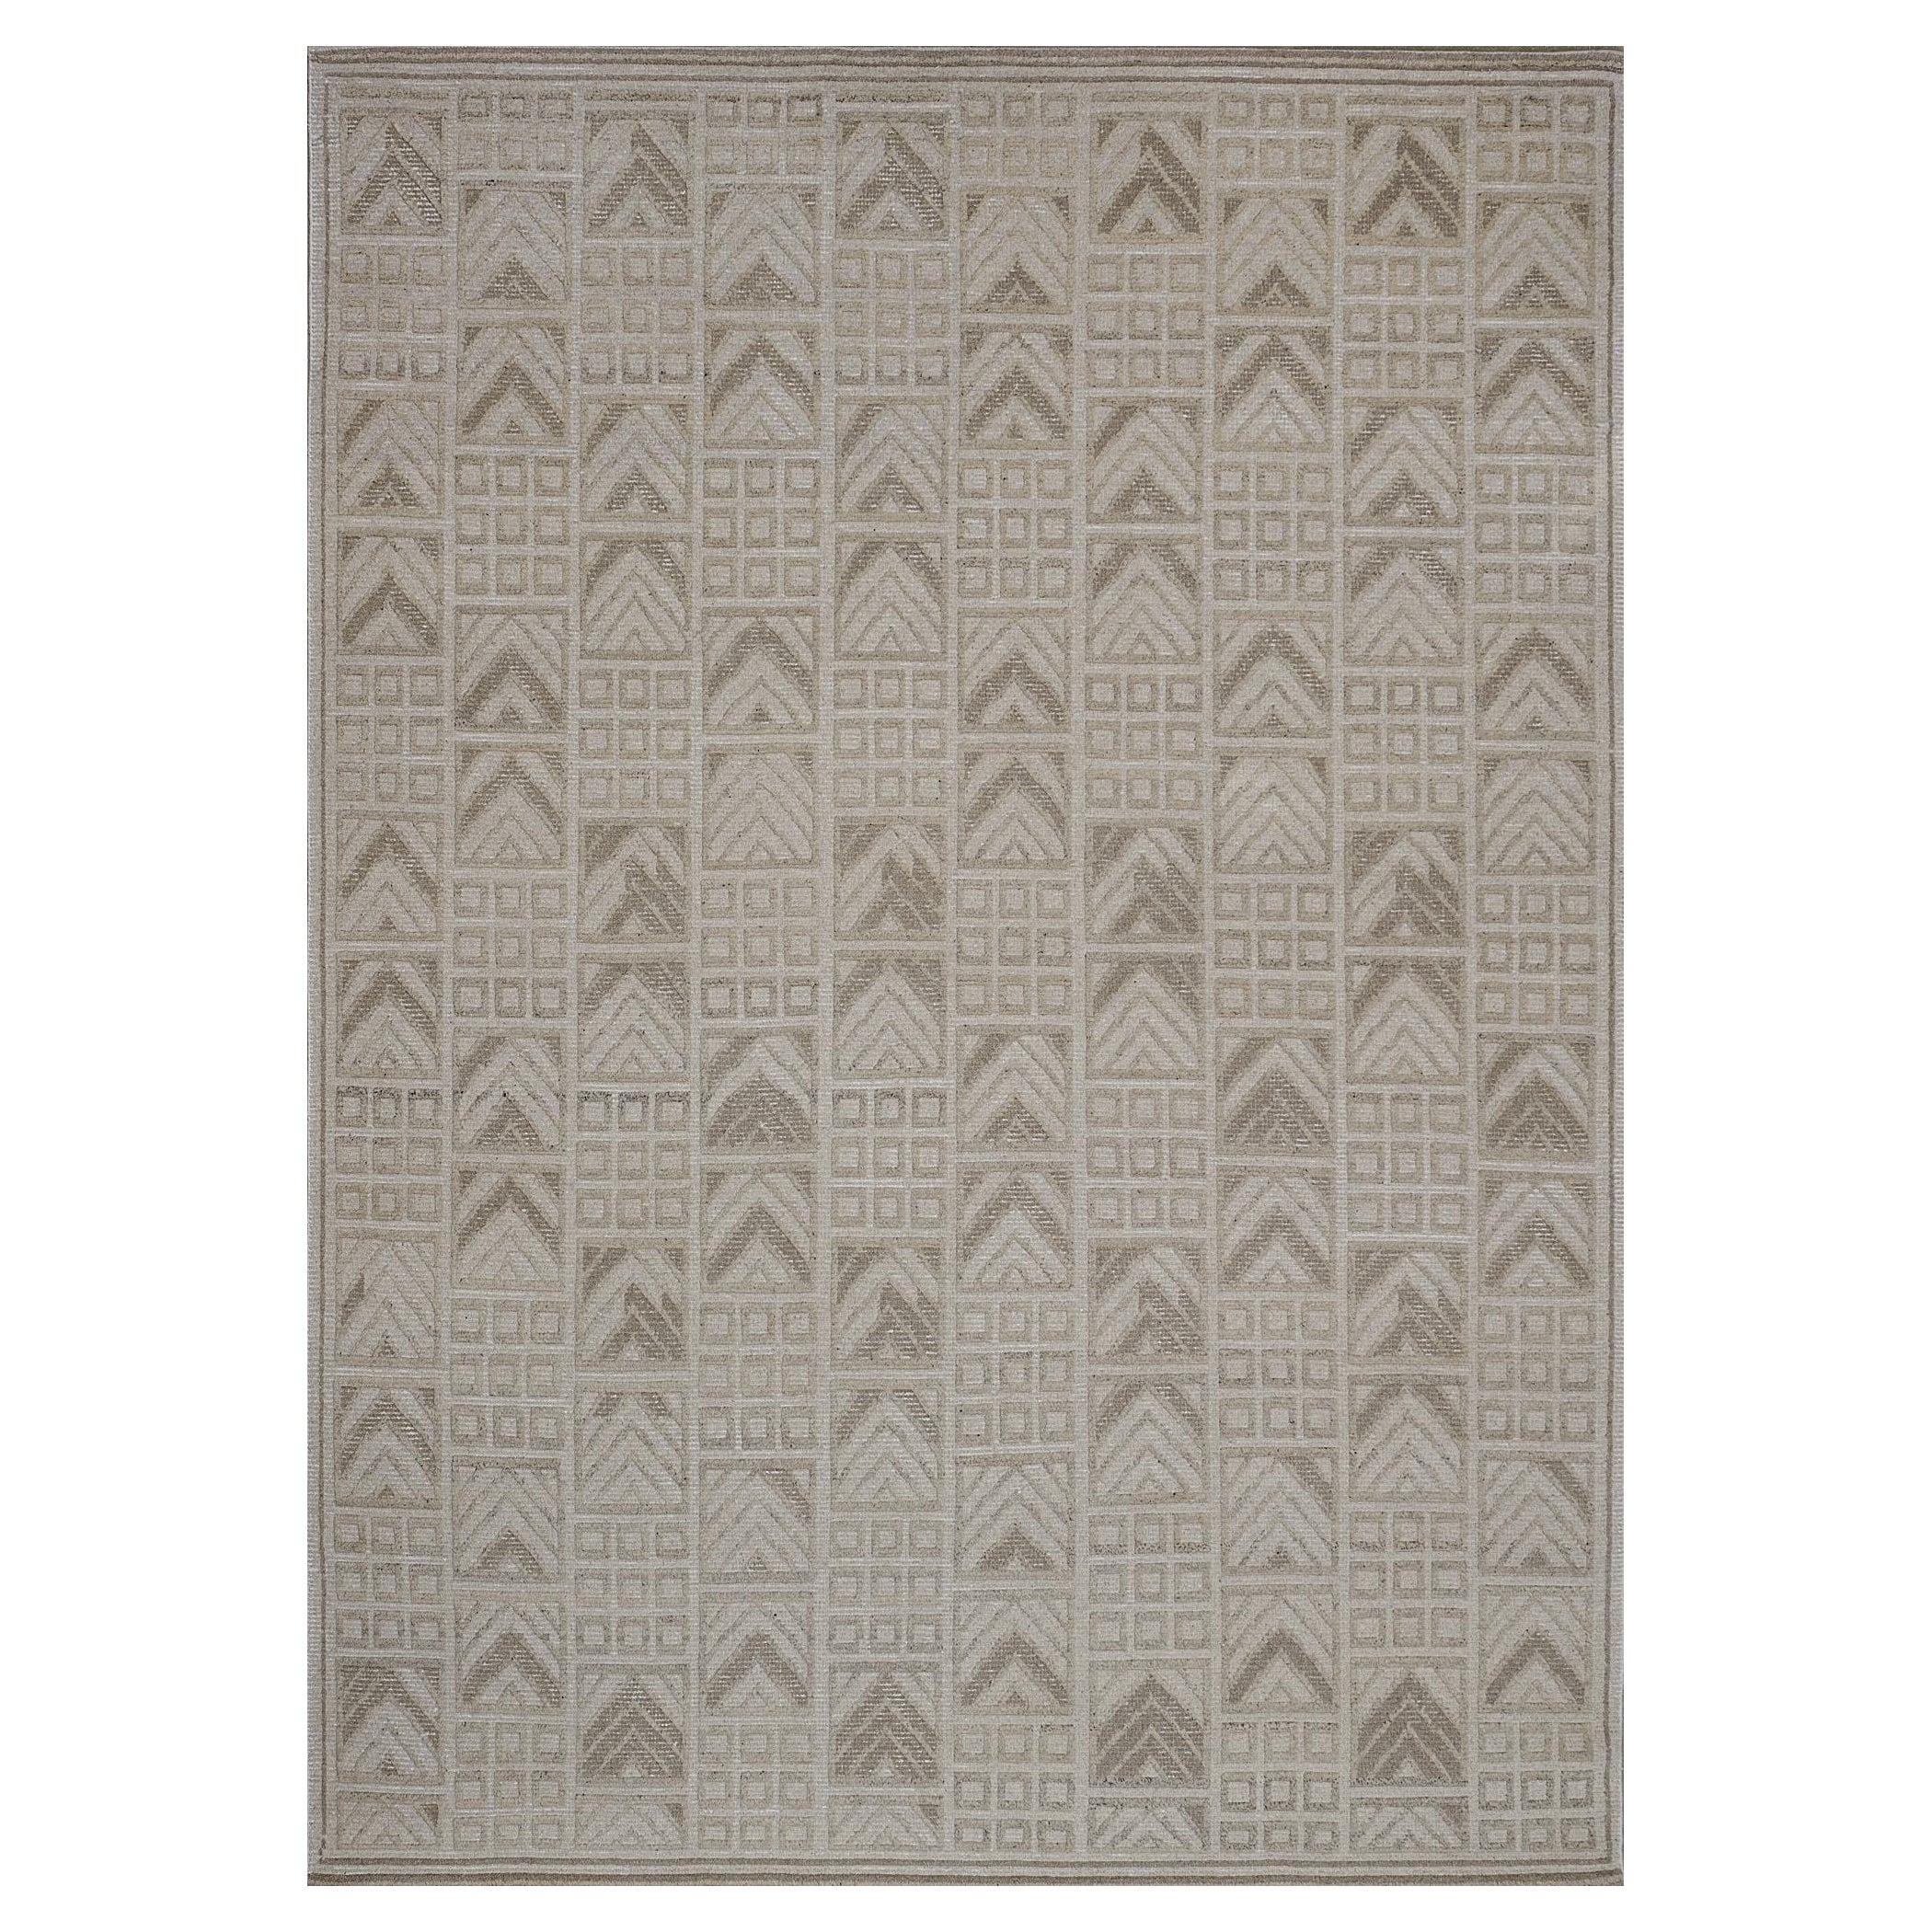 New Handwoven Swedish Inspired Flat-Weave Rug For Sale